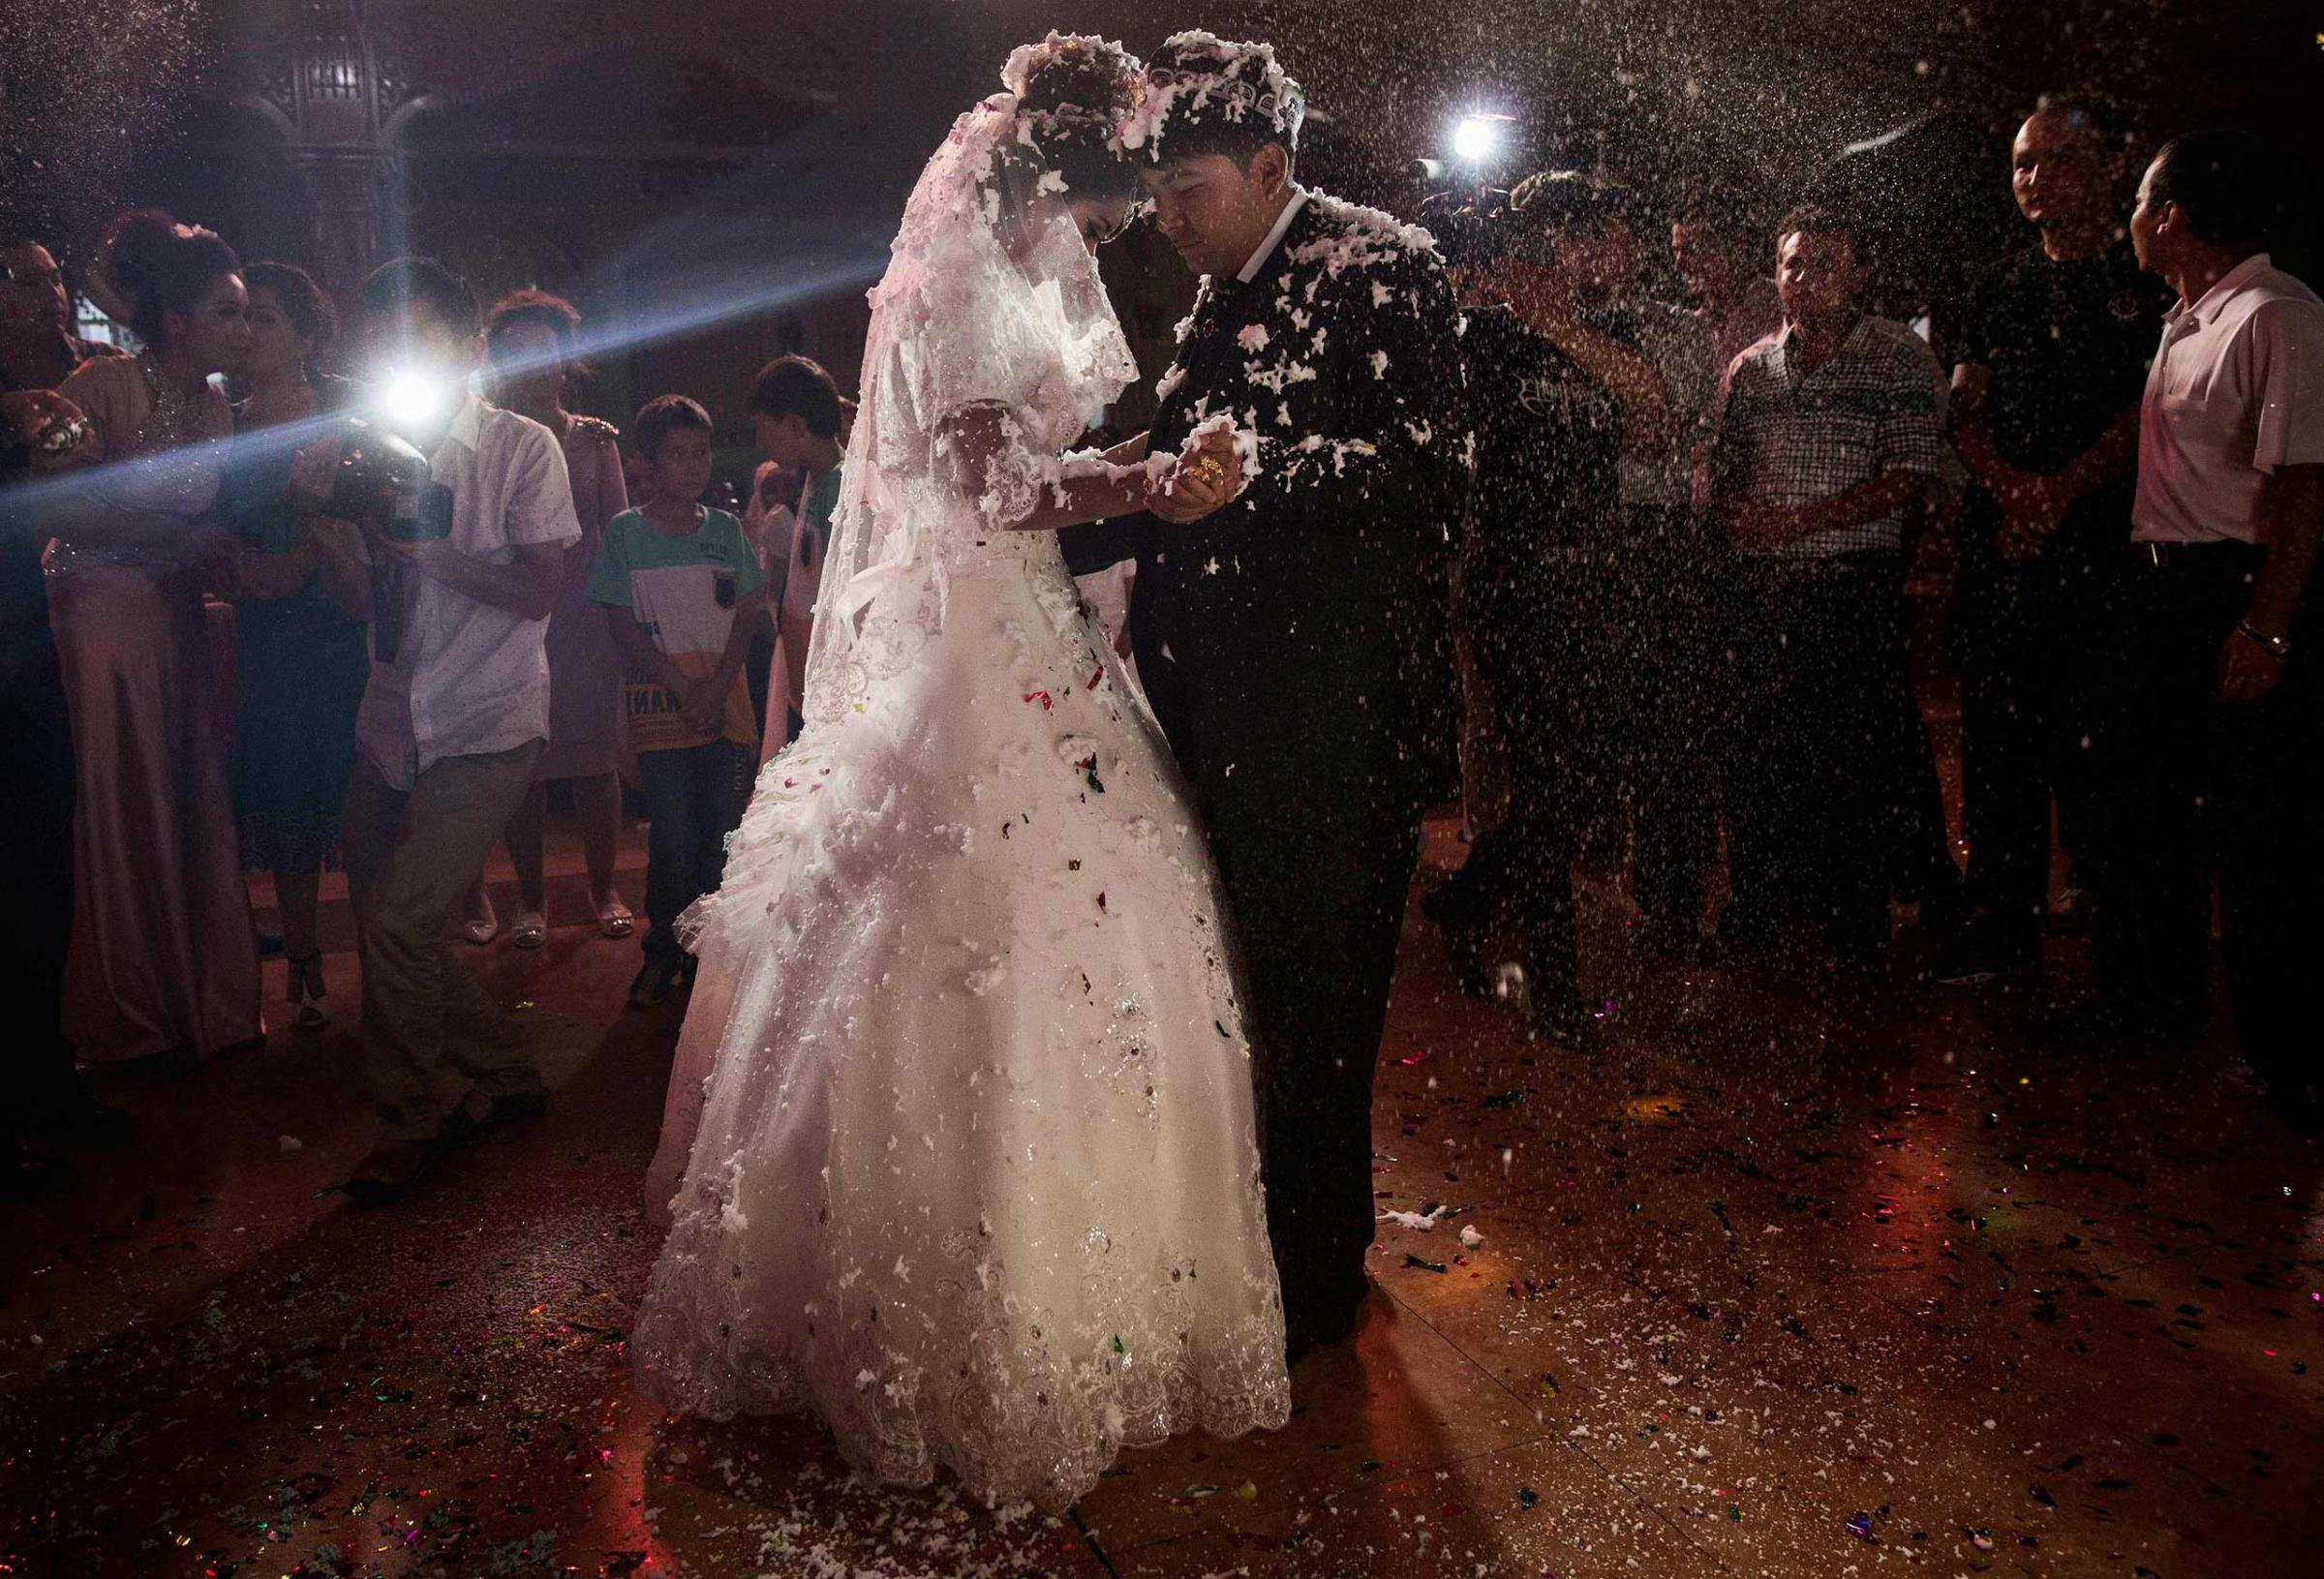 A Uighur couple have their first dance at their wedding celebration after being married in Kashgar, Xinjiang Province, China, on Aug. 2, 2014.